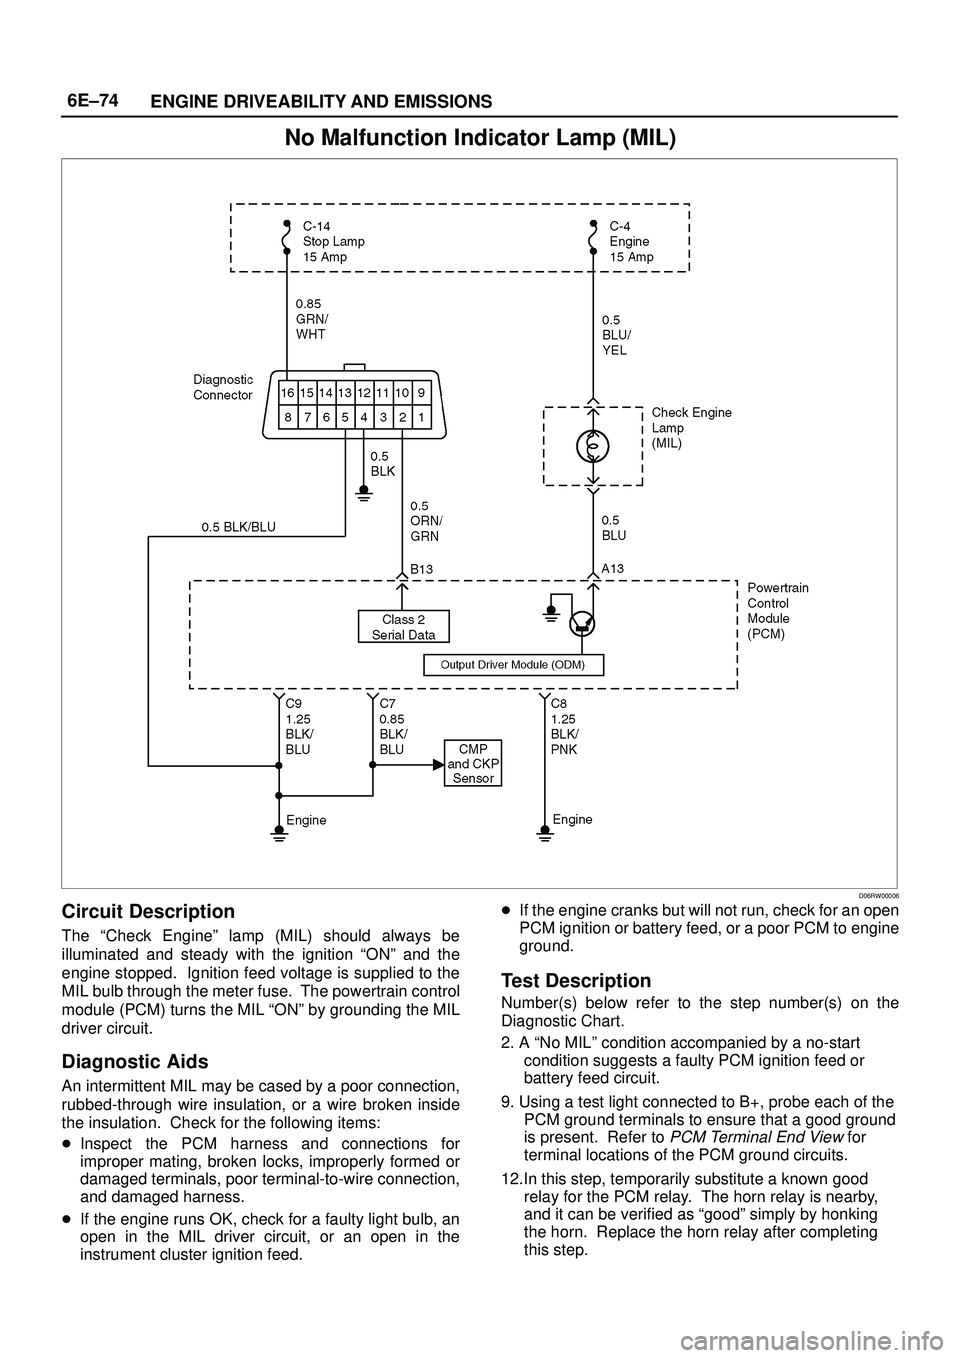 ISUZU TROOPER 1998  Service Repair Manual 6E±74
ENGINE DRIVEABILITY AND EMISSIONS
No Malfunction Indicator Lamp (MIL)
D06RW00006
Circuit Description
The ªCheck Engineº lamp (MIL) should always be
illuminated and steady with the ignition ª